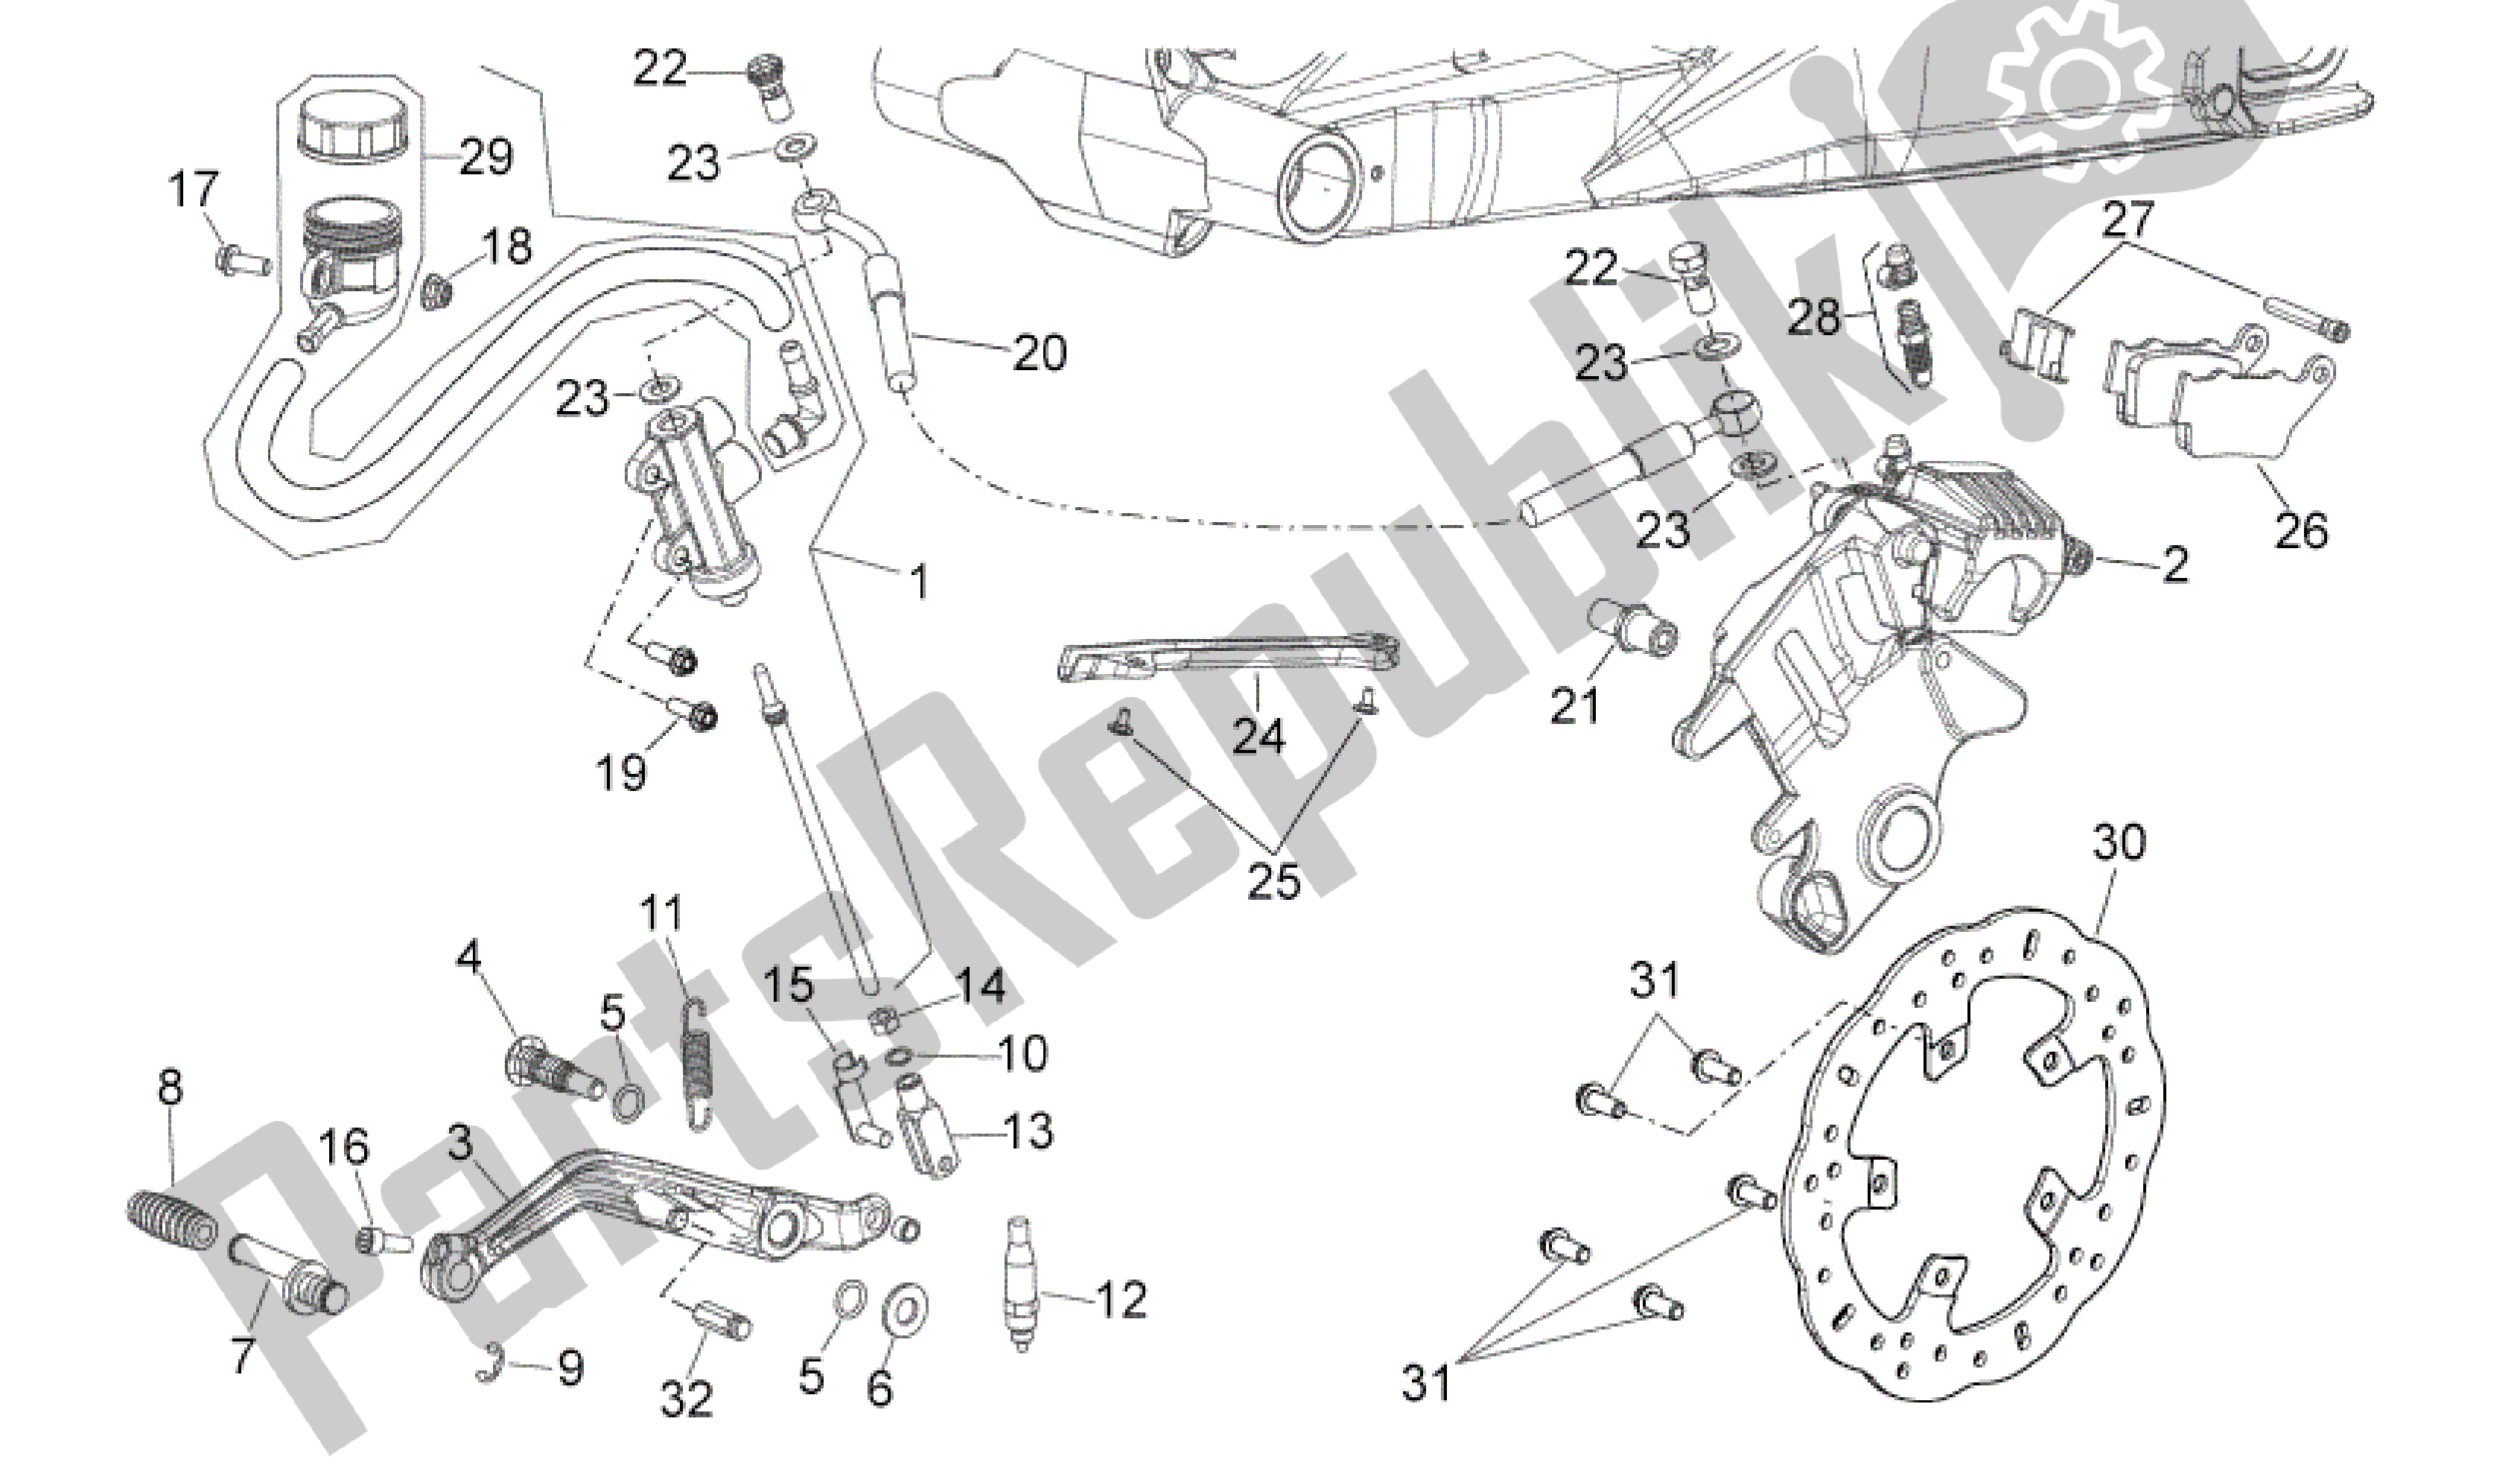 All parts for the Rear Brake System of the Aprilia Shiver 750 2010 - 2013